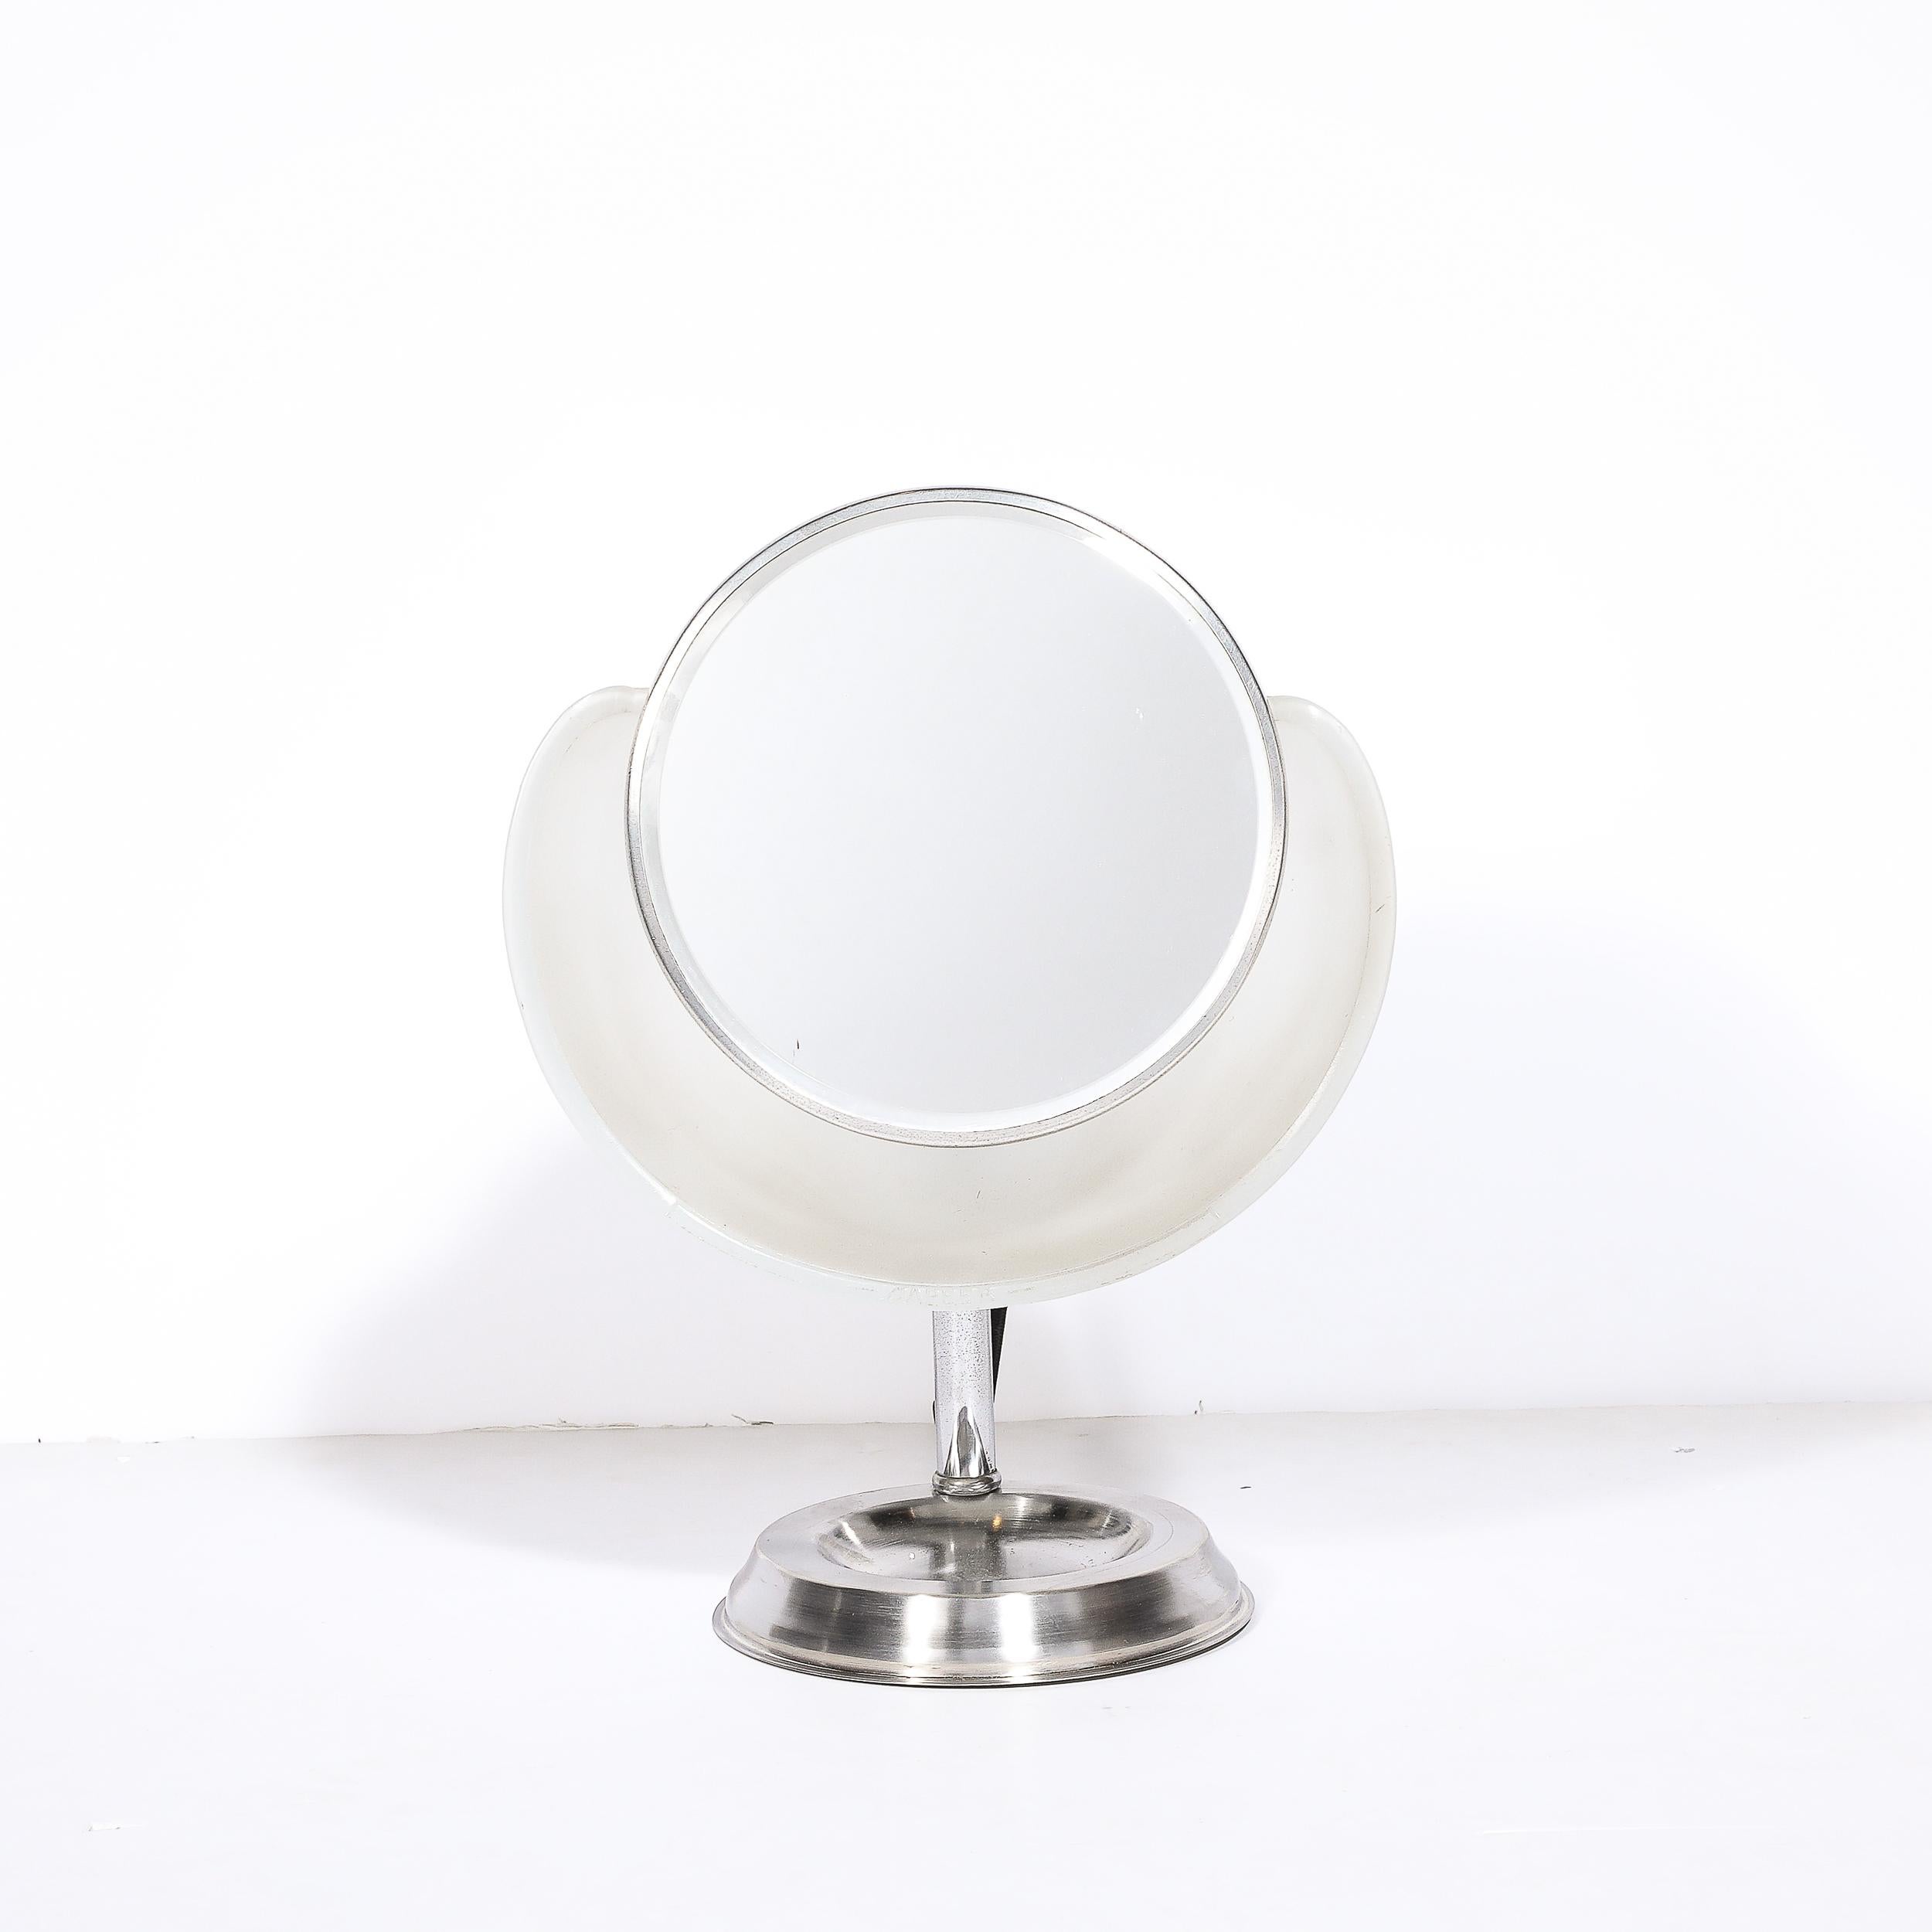 This unique and materially exquisite Art Deco Round Frosted Glass and Chrome Vanity Mirror by Lampeer Lamp Co. was created in the United States in 1928. Features a round central pane of mirror circumscribed with chrome, beautifully polished and